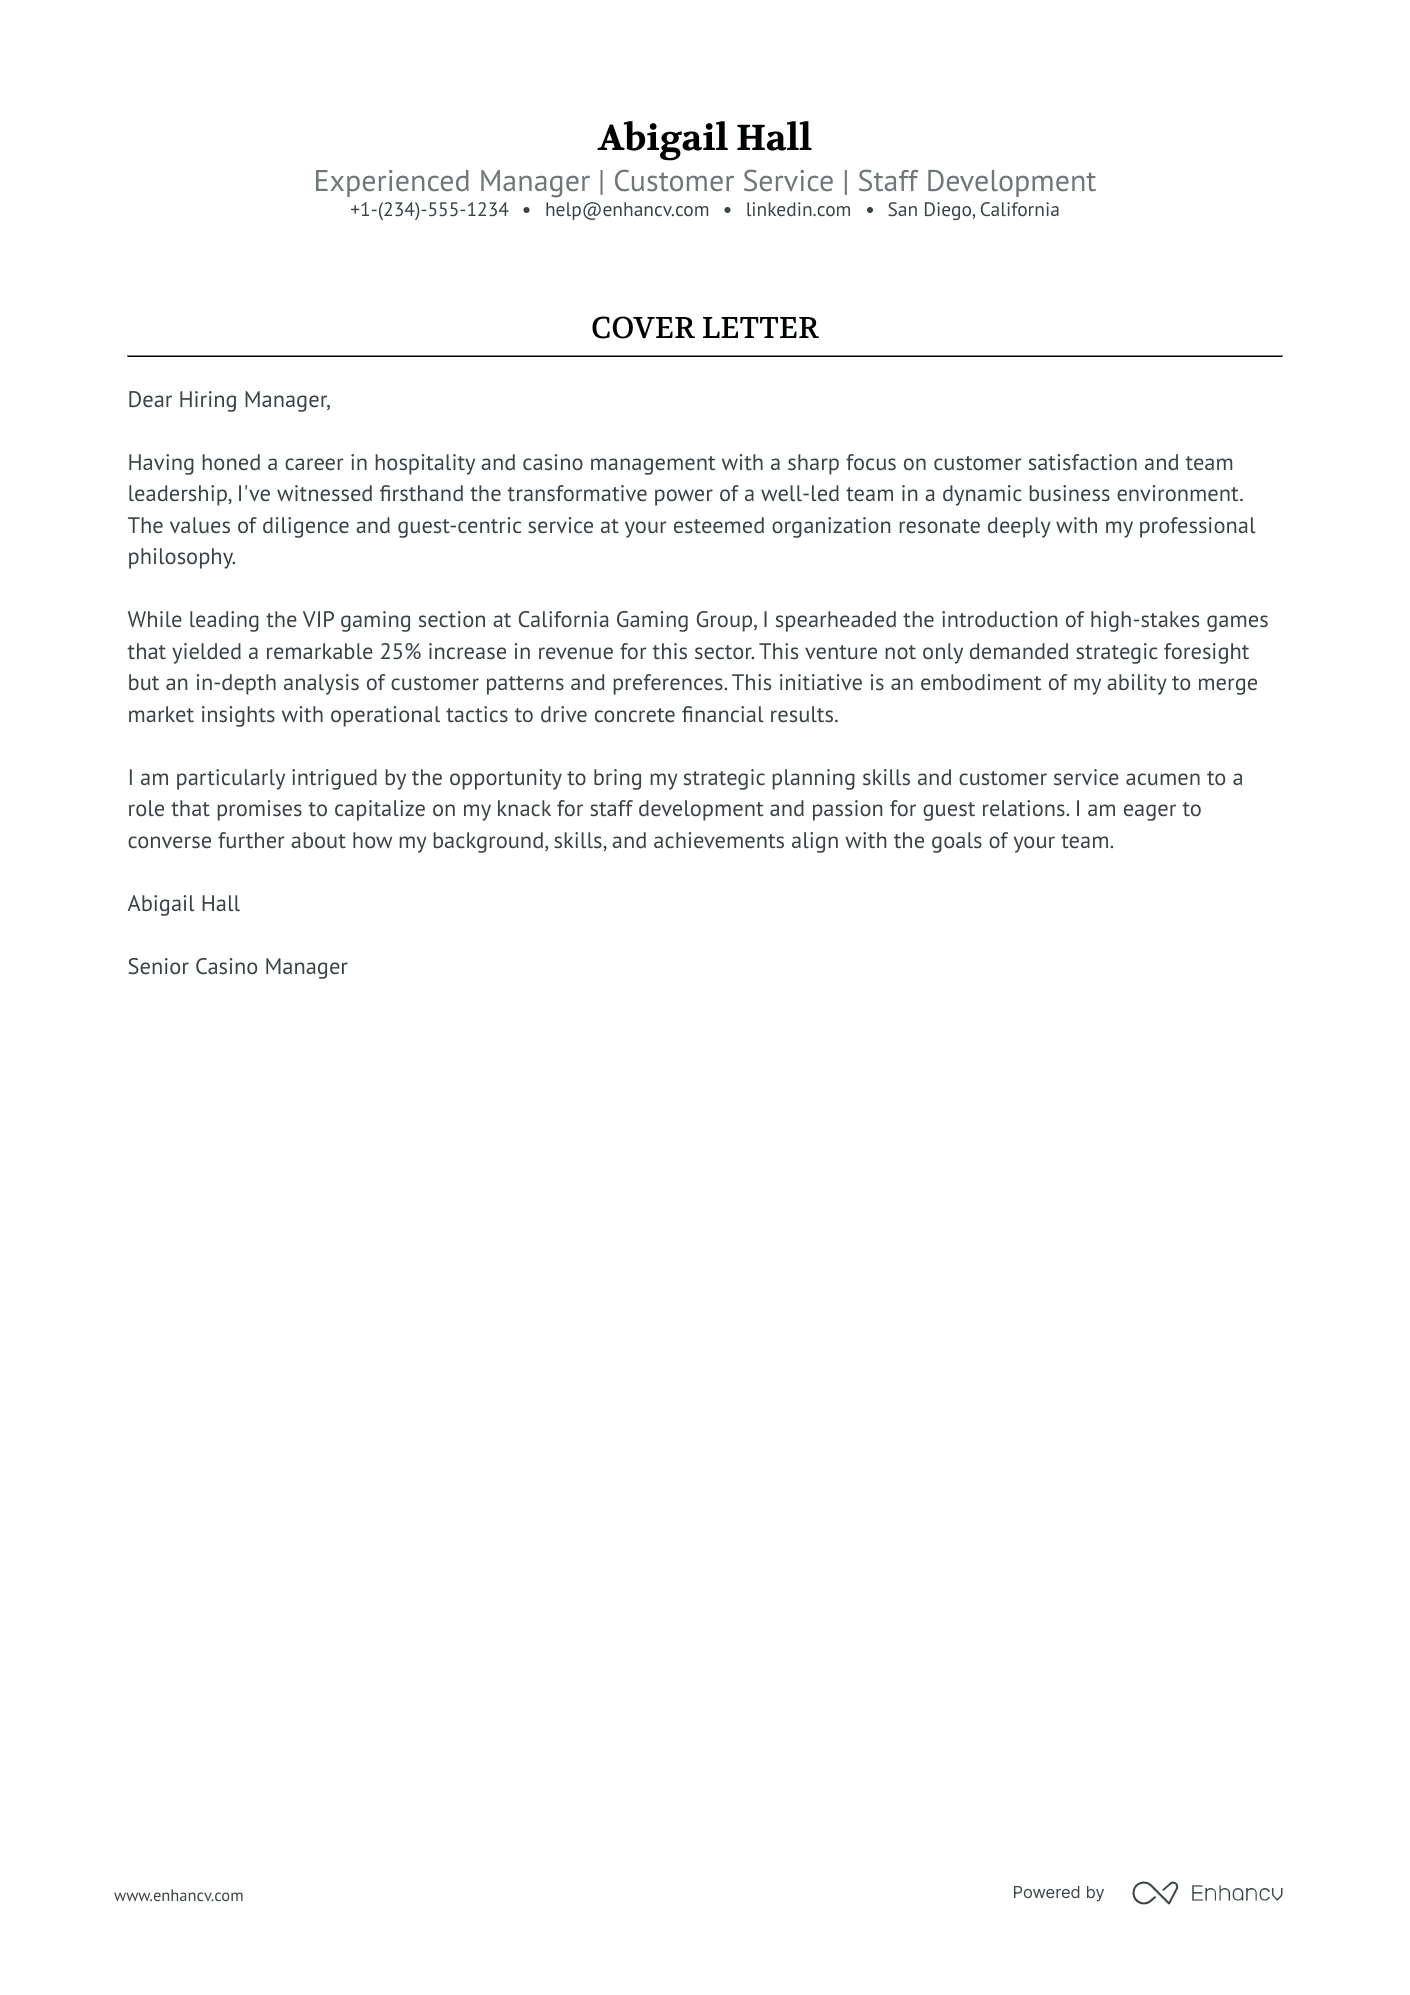 Casino Manager cover letter